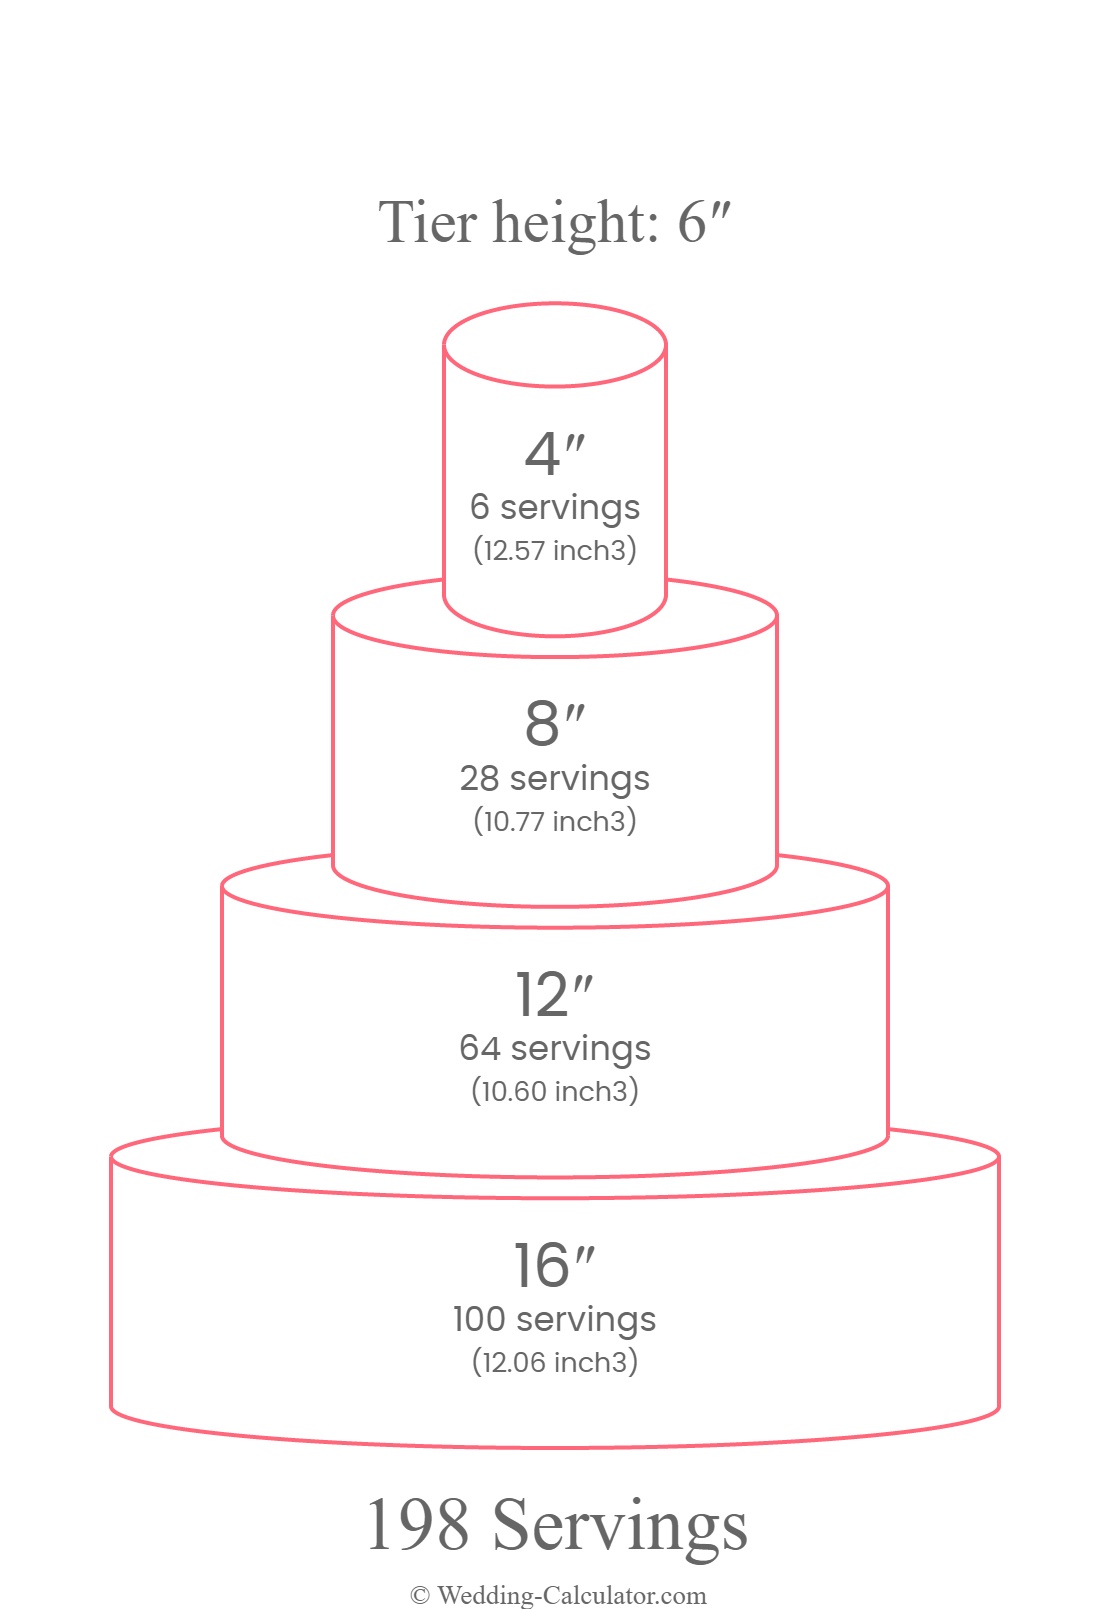 Servings chart for a round 4 tier wedding cake for 198 servings with 16″, 12″, 8″ & 4″ diameter tiers